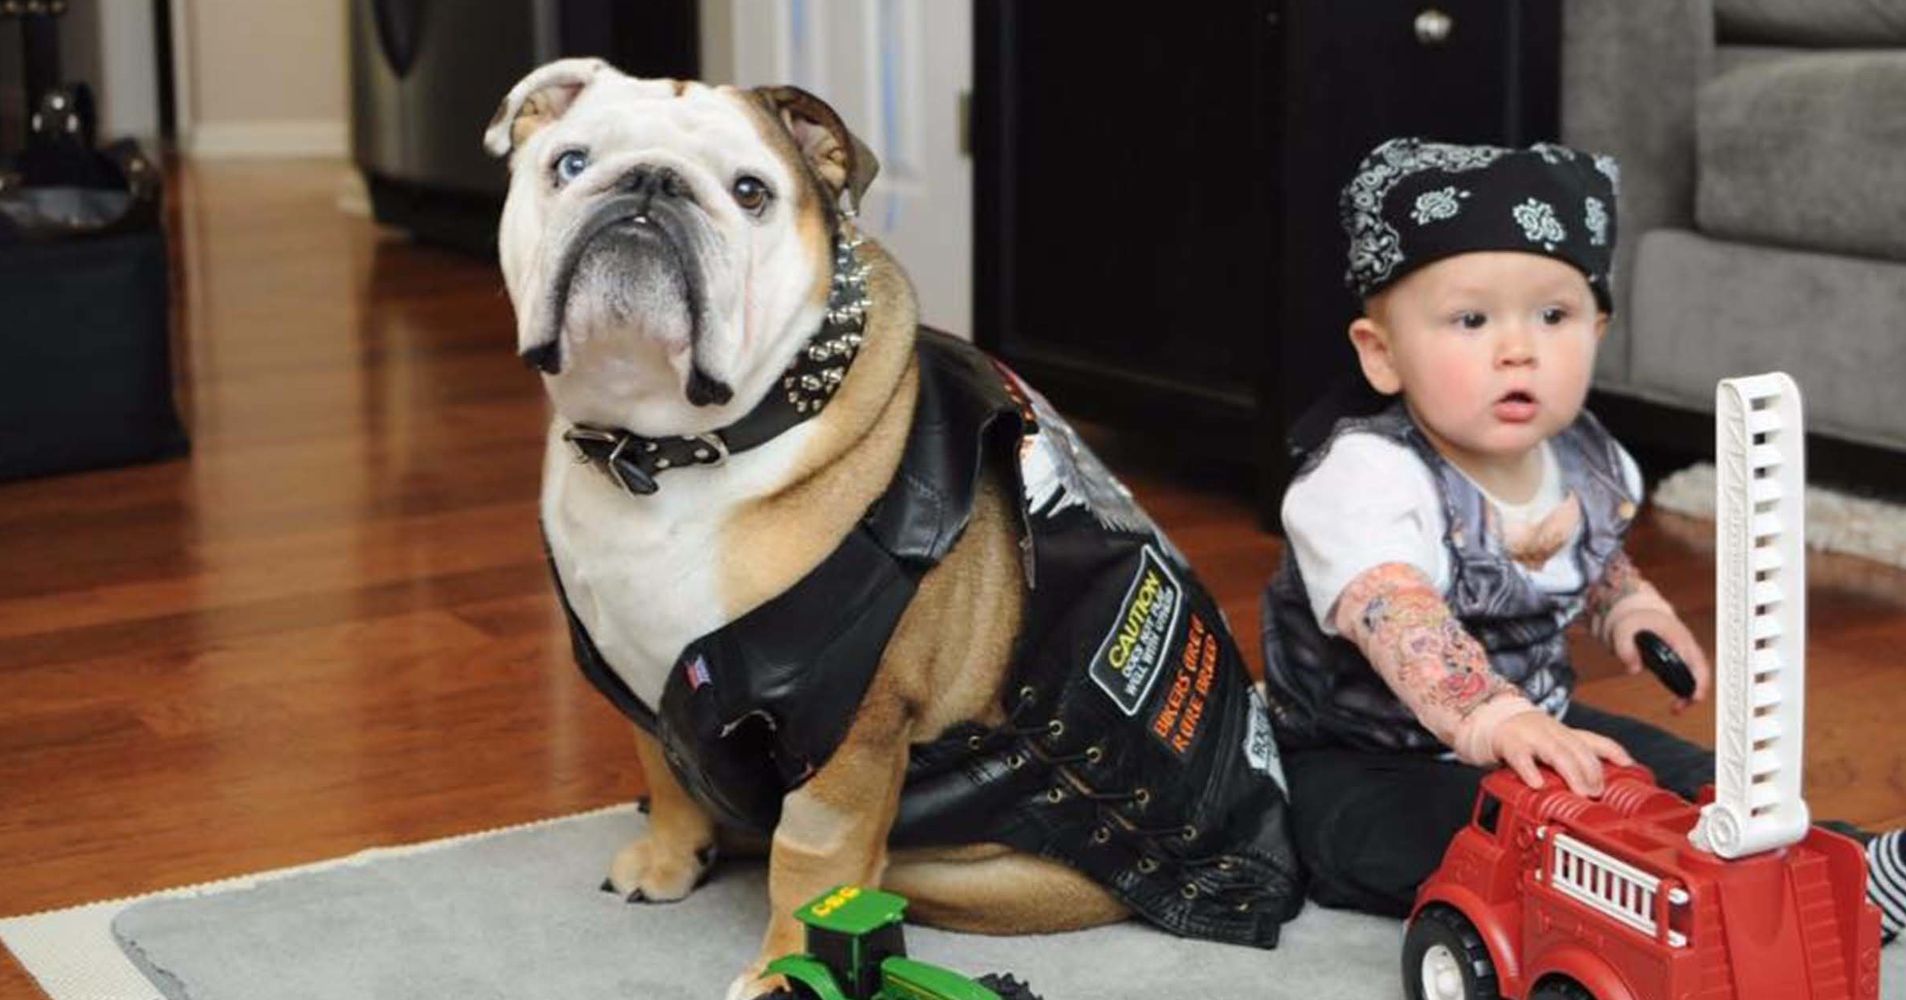 23 Dog And Kid Halloween Costumes That Will Make You Squeal | HuffPost Life